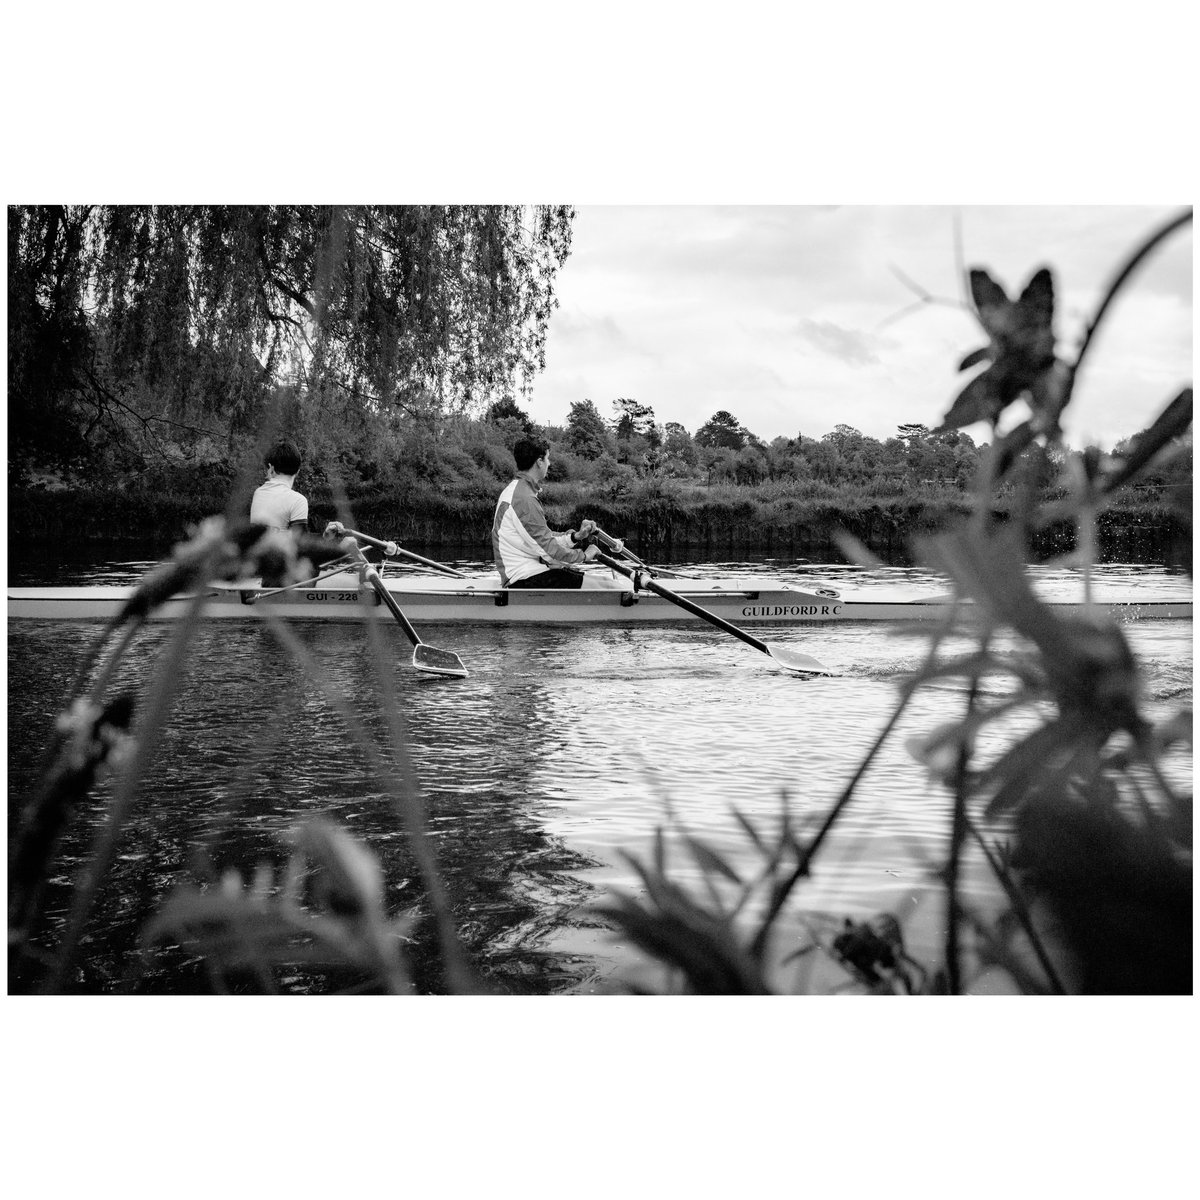 Rowers on the River Wey Guildford.
#riverwey #Guildford #cobbledstreets #guildfordsurrey #dorking #dorkinghighstreet #dorkingsurrey #dorkingtown #dorkingout #hellodorking #lightandshadow #protectyourhighlights #embraceyourshadows #myfujilove #myfujifilm #streetphotography